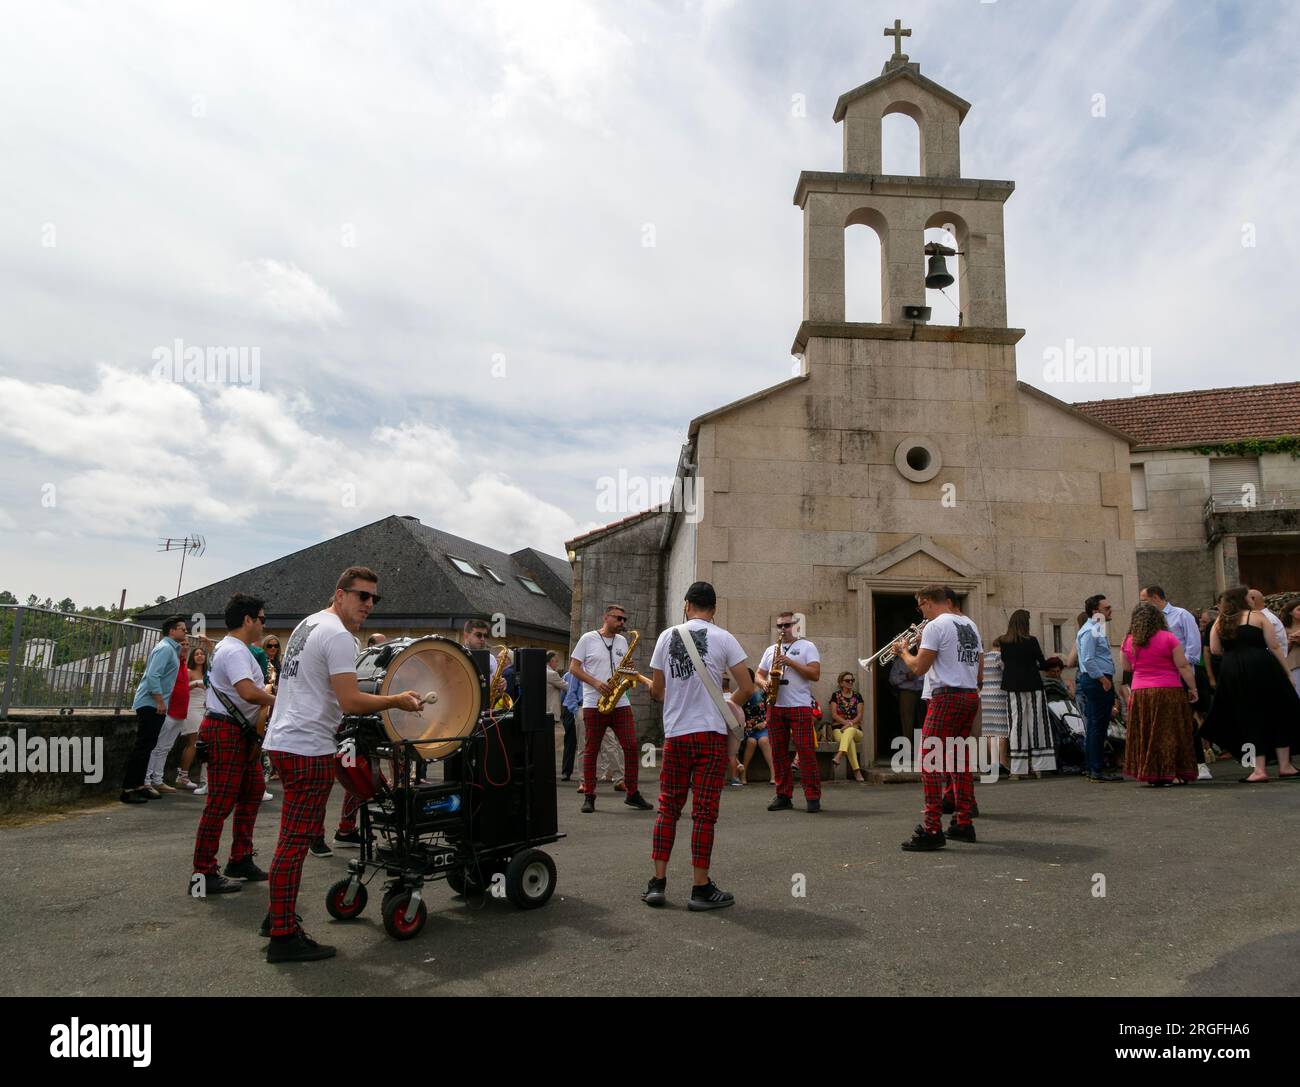 Village fiesta musicians and villagers outside chapel church, Rubillon, Ourense province, Galicia, Spain Stock Photo